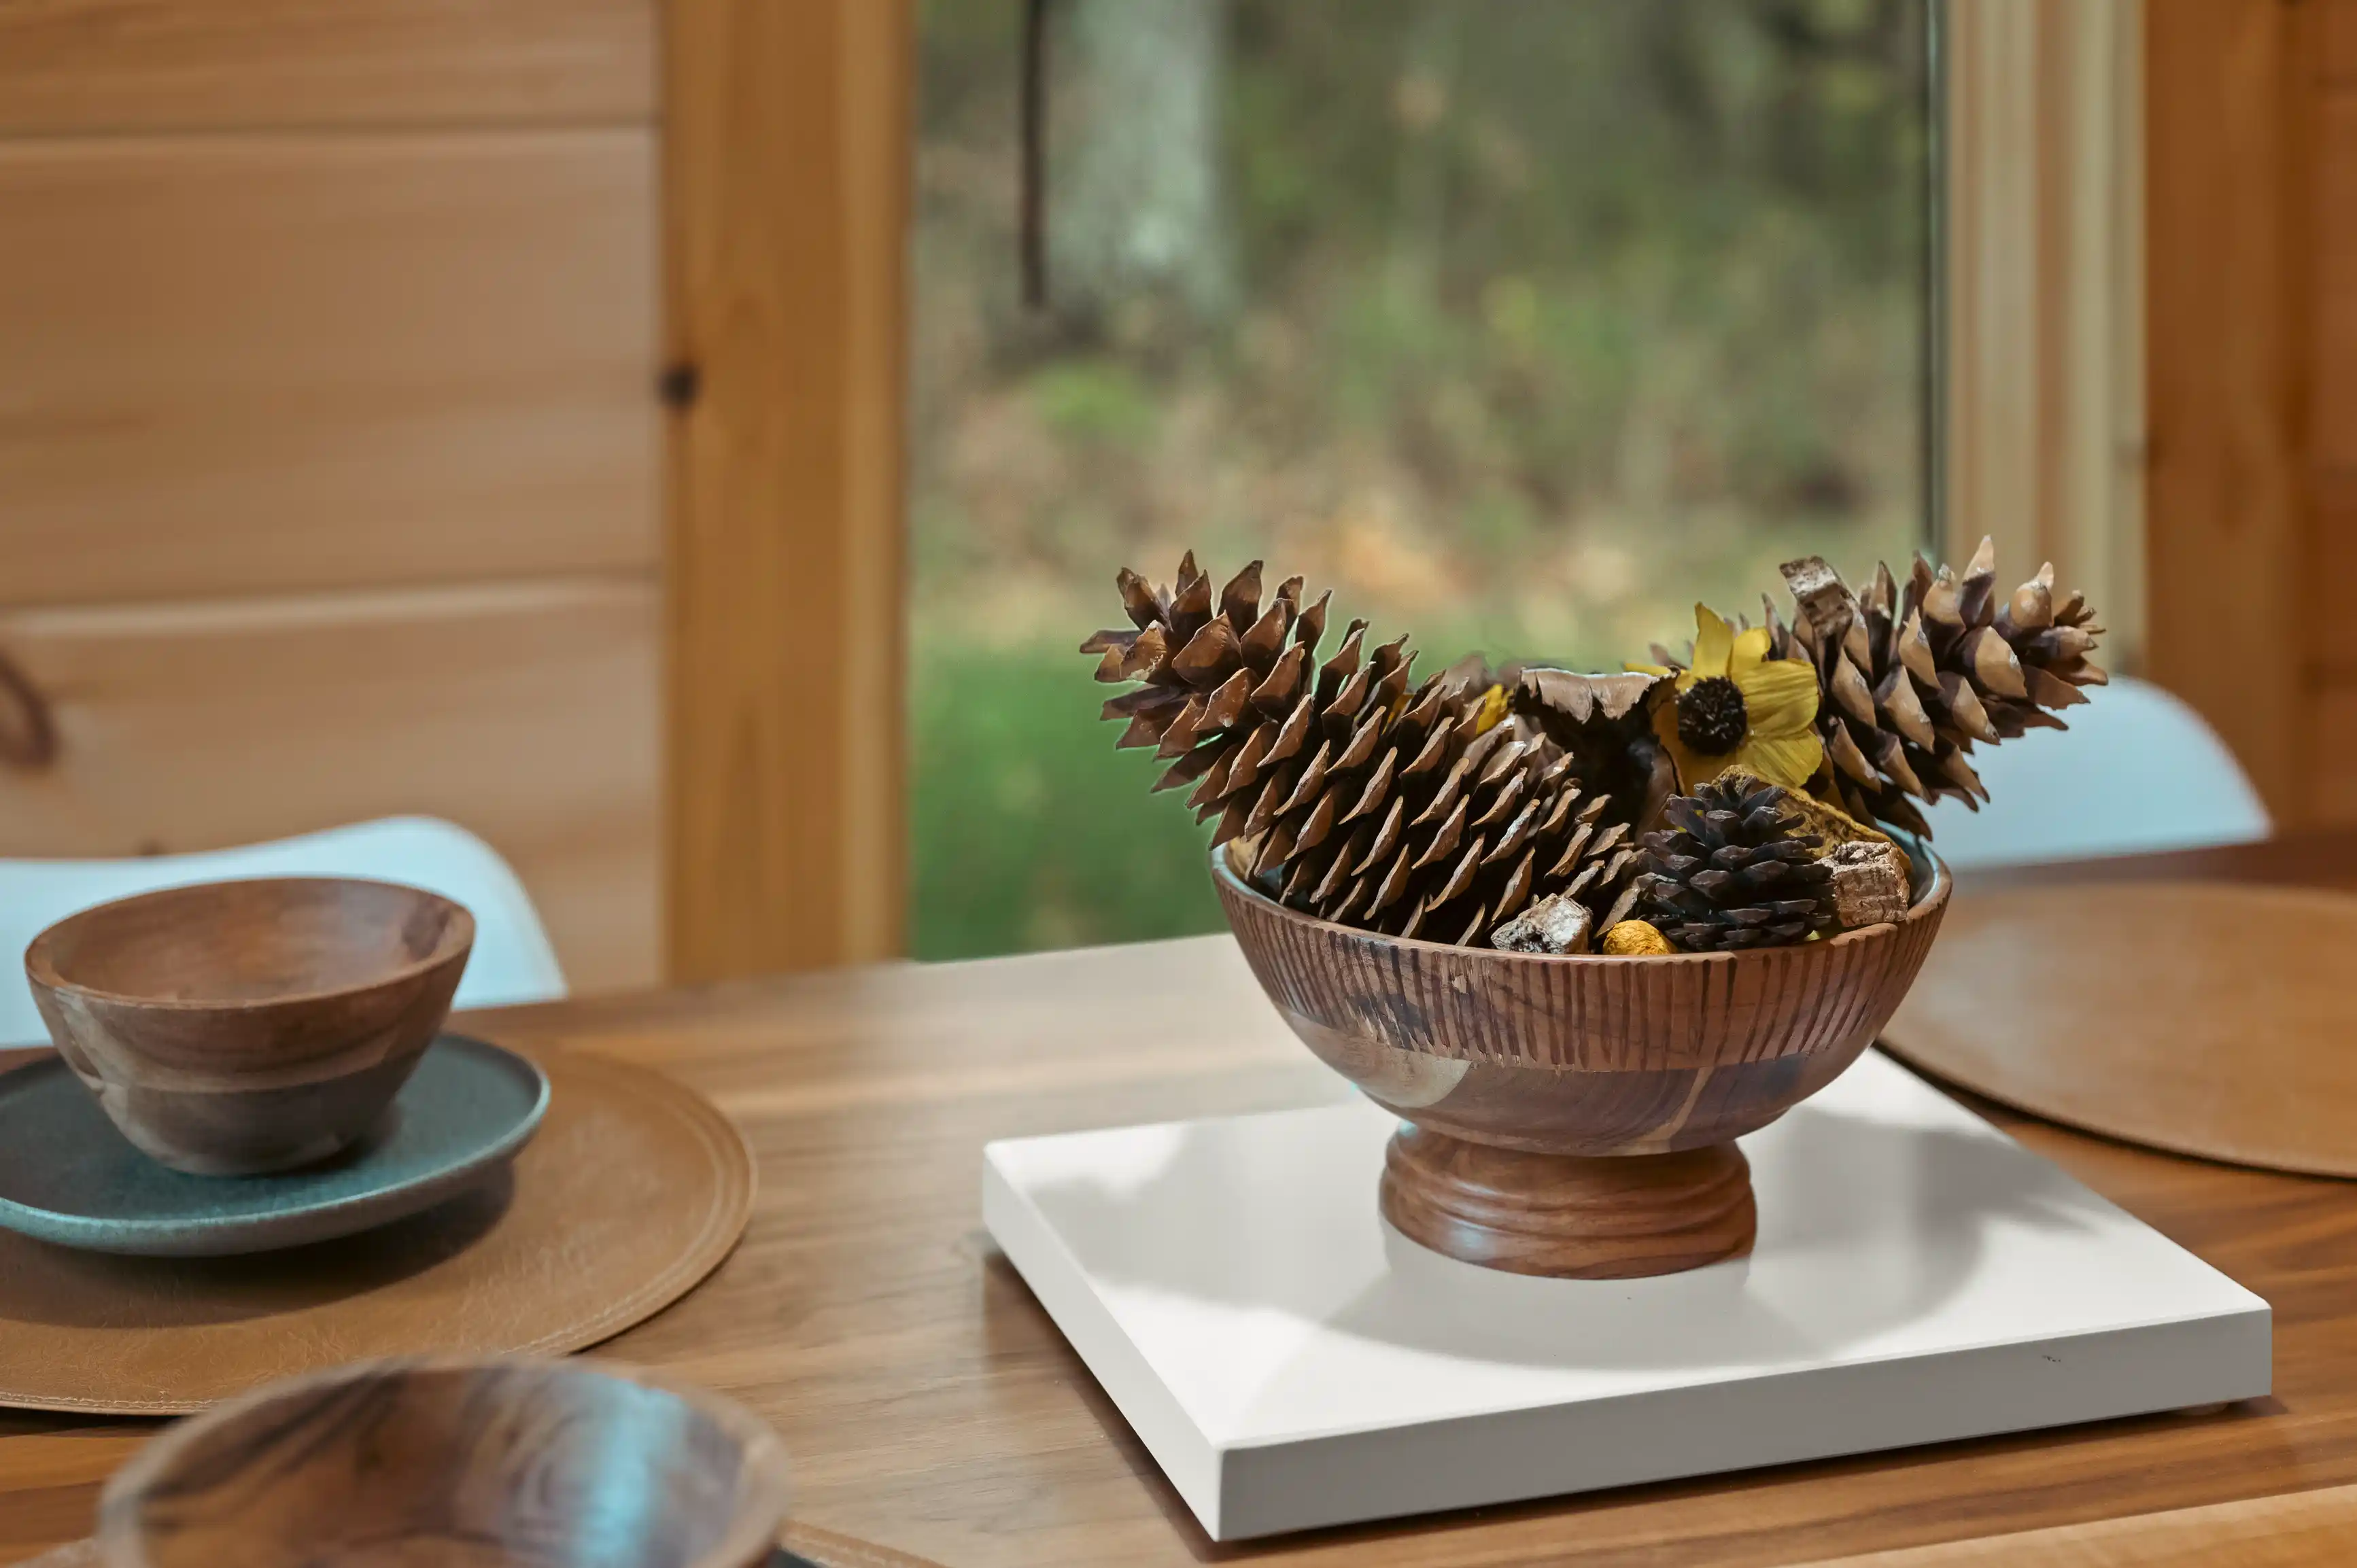 Wooden bowl filled with pine cones on a white tray on a wooden table, with other wooden dishes and a blurred forest view in the background.